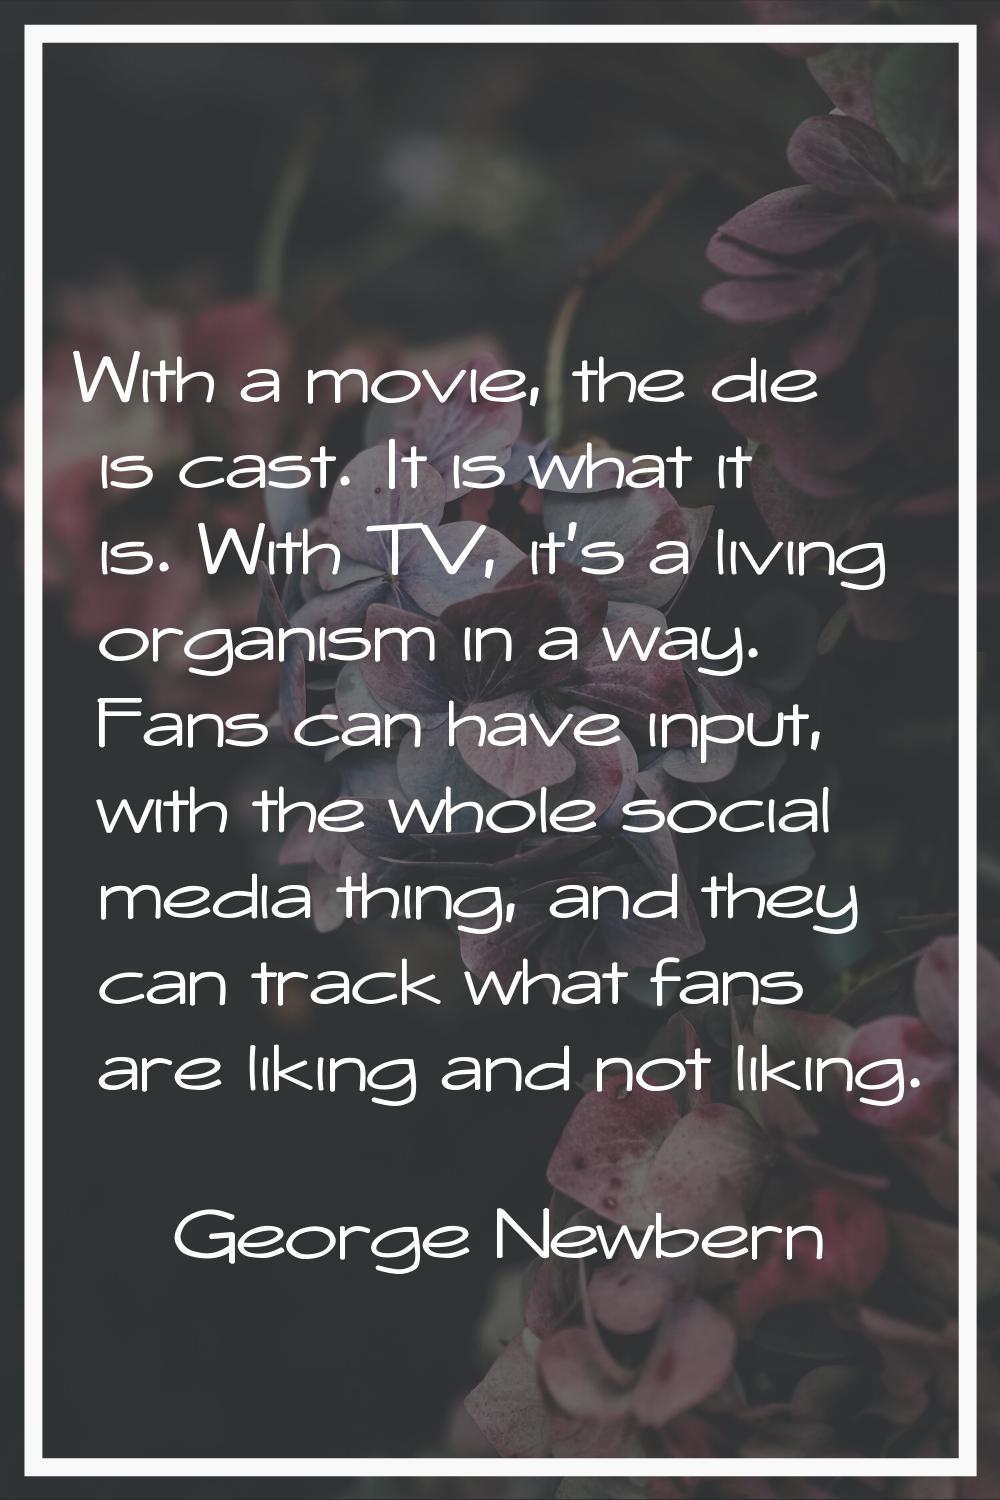 With a movie, the die is cast. It is what it is. With TV, it's a living organism in a way. Fans can